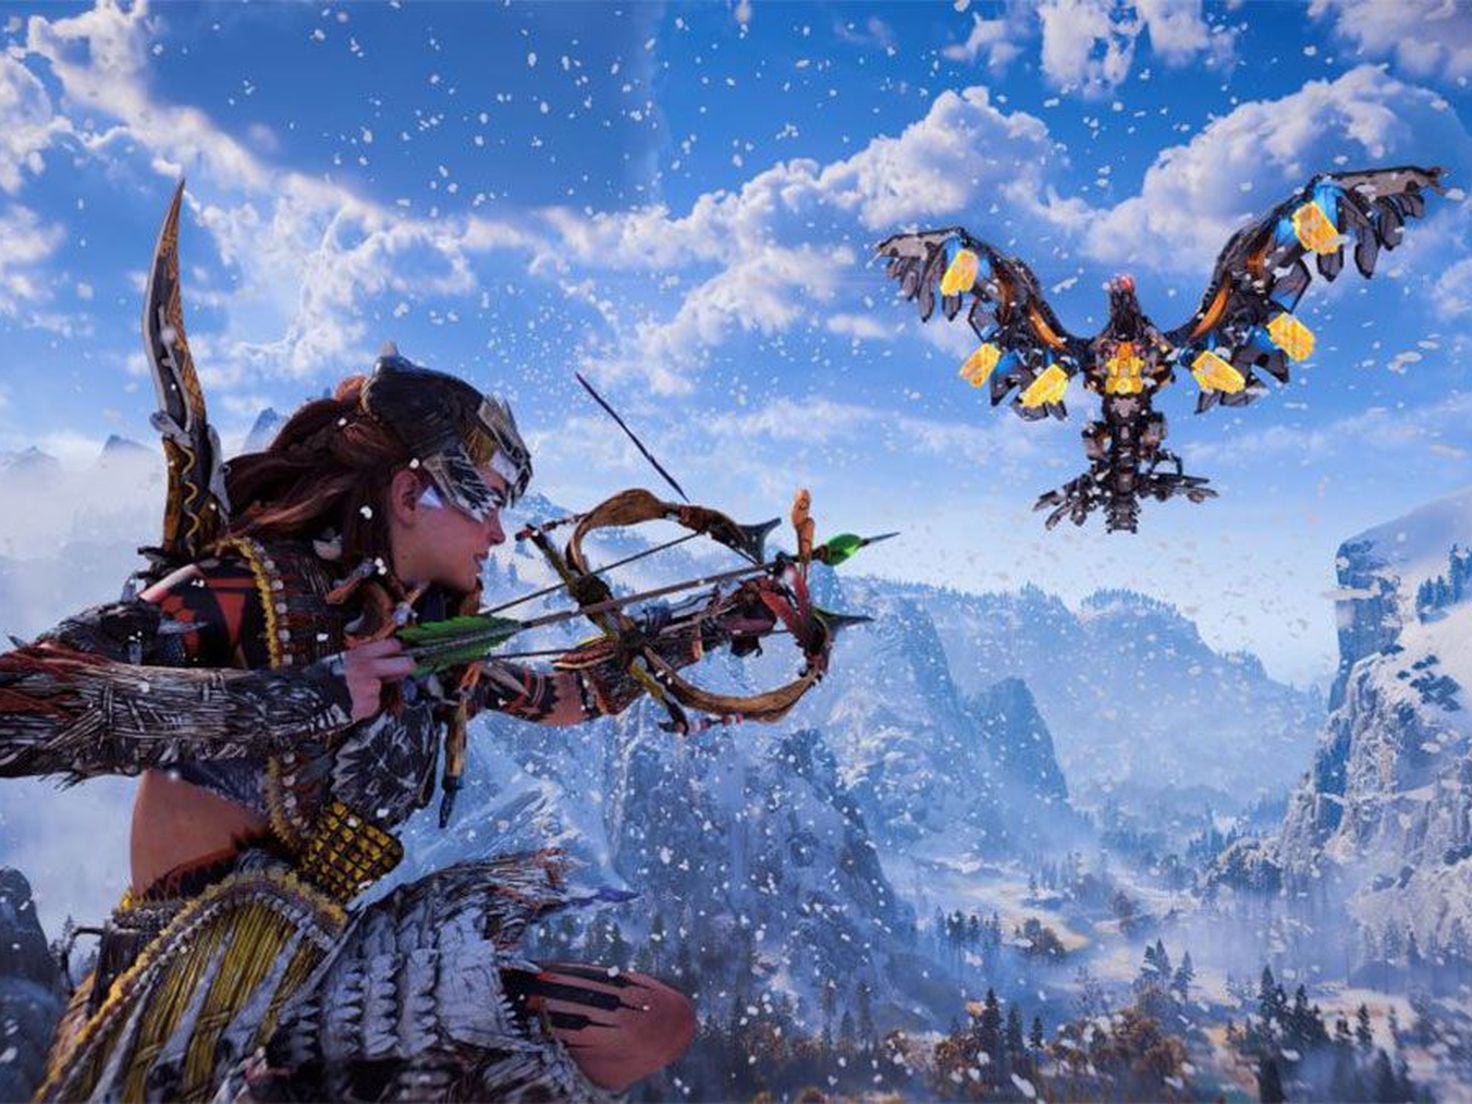 Behind The Scenes Of Microsoft Trying To Develop Horizon Zero Dawn